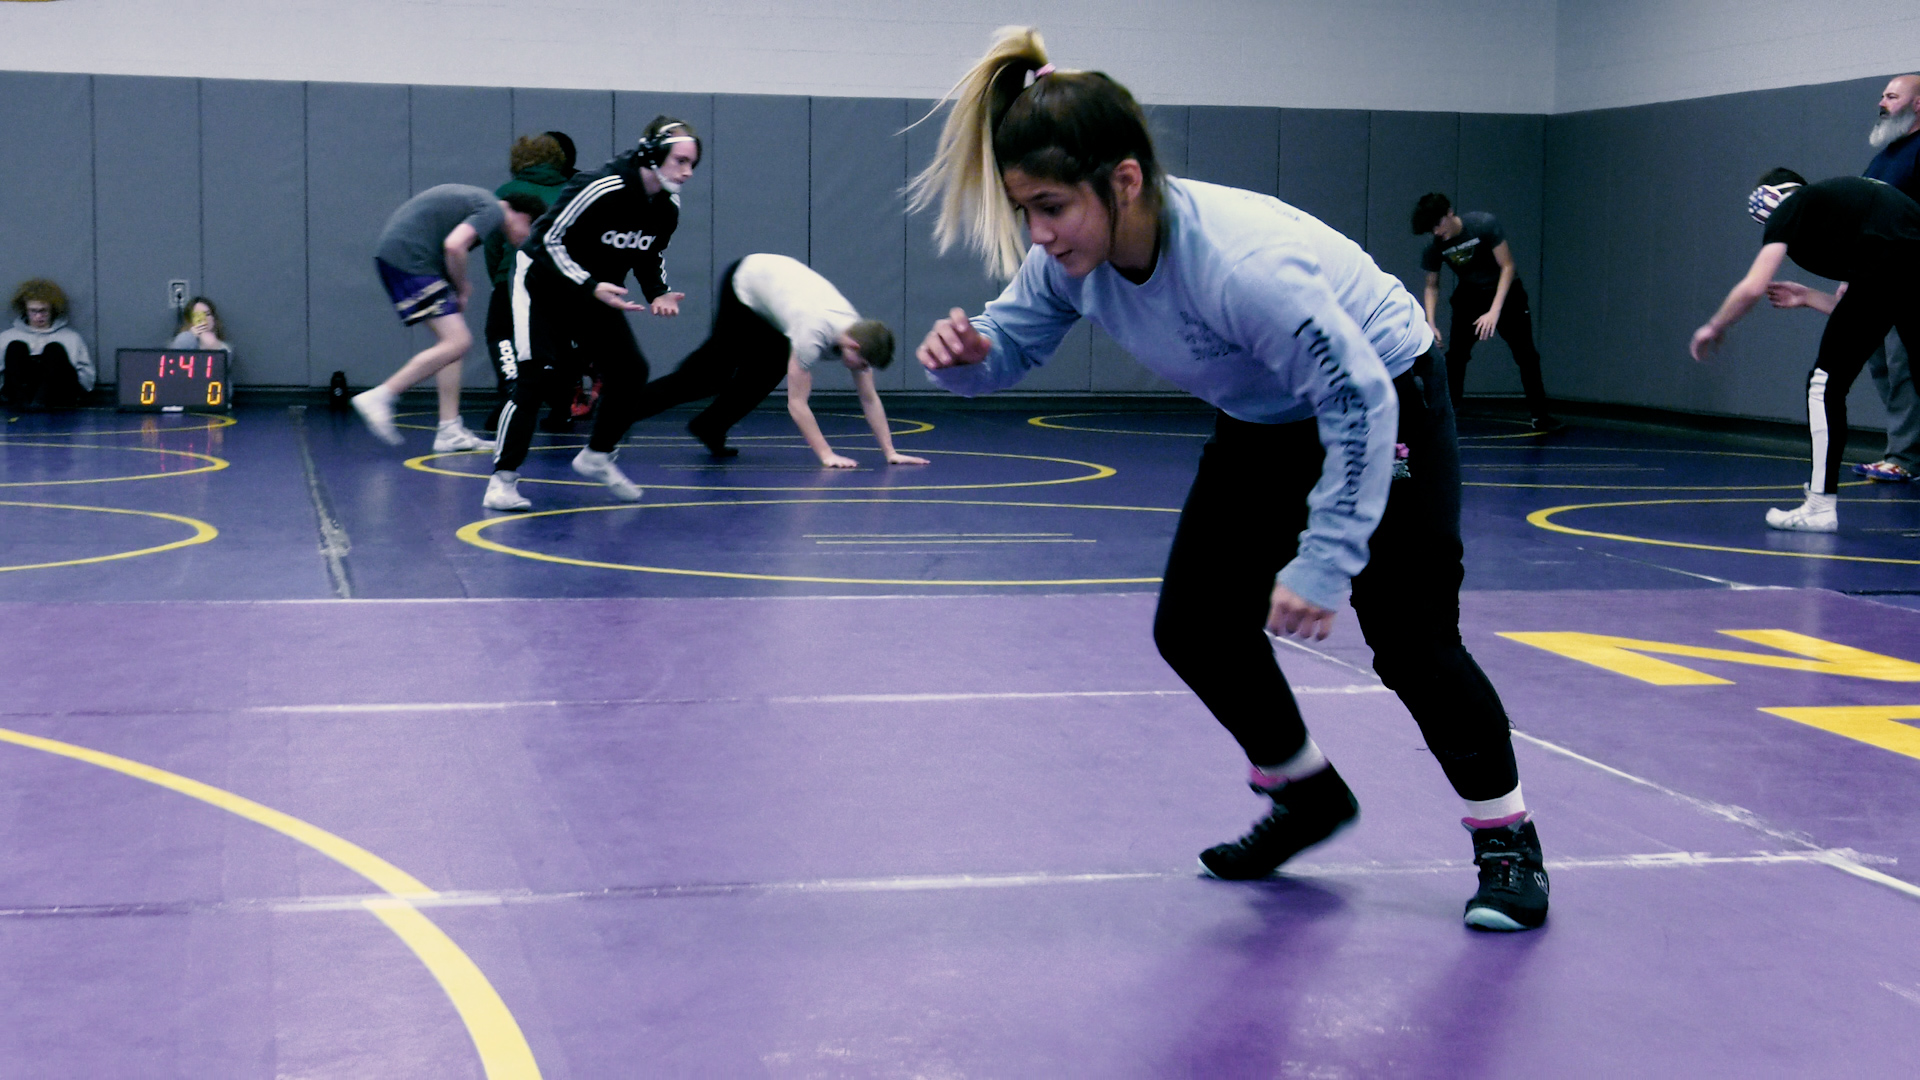 Julianna Ocampo brings new horizons to New Haven wrestling